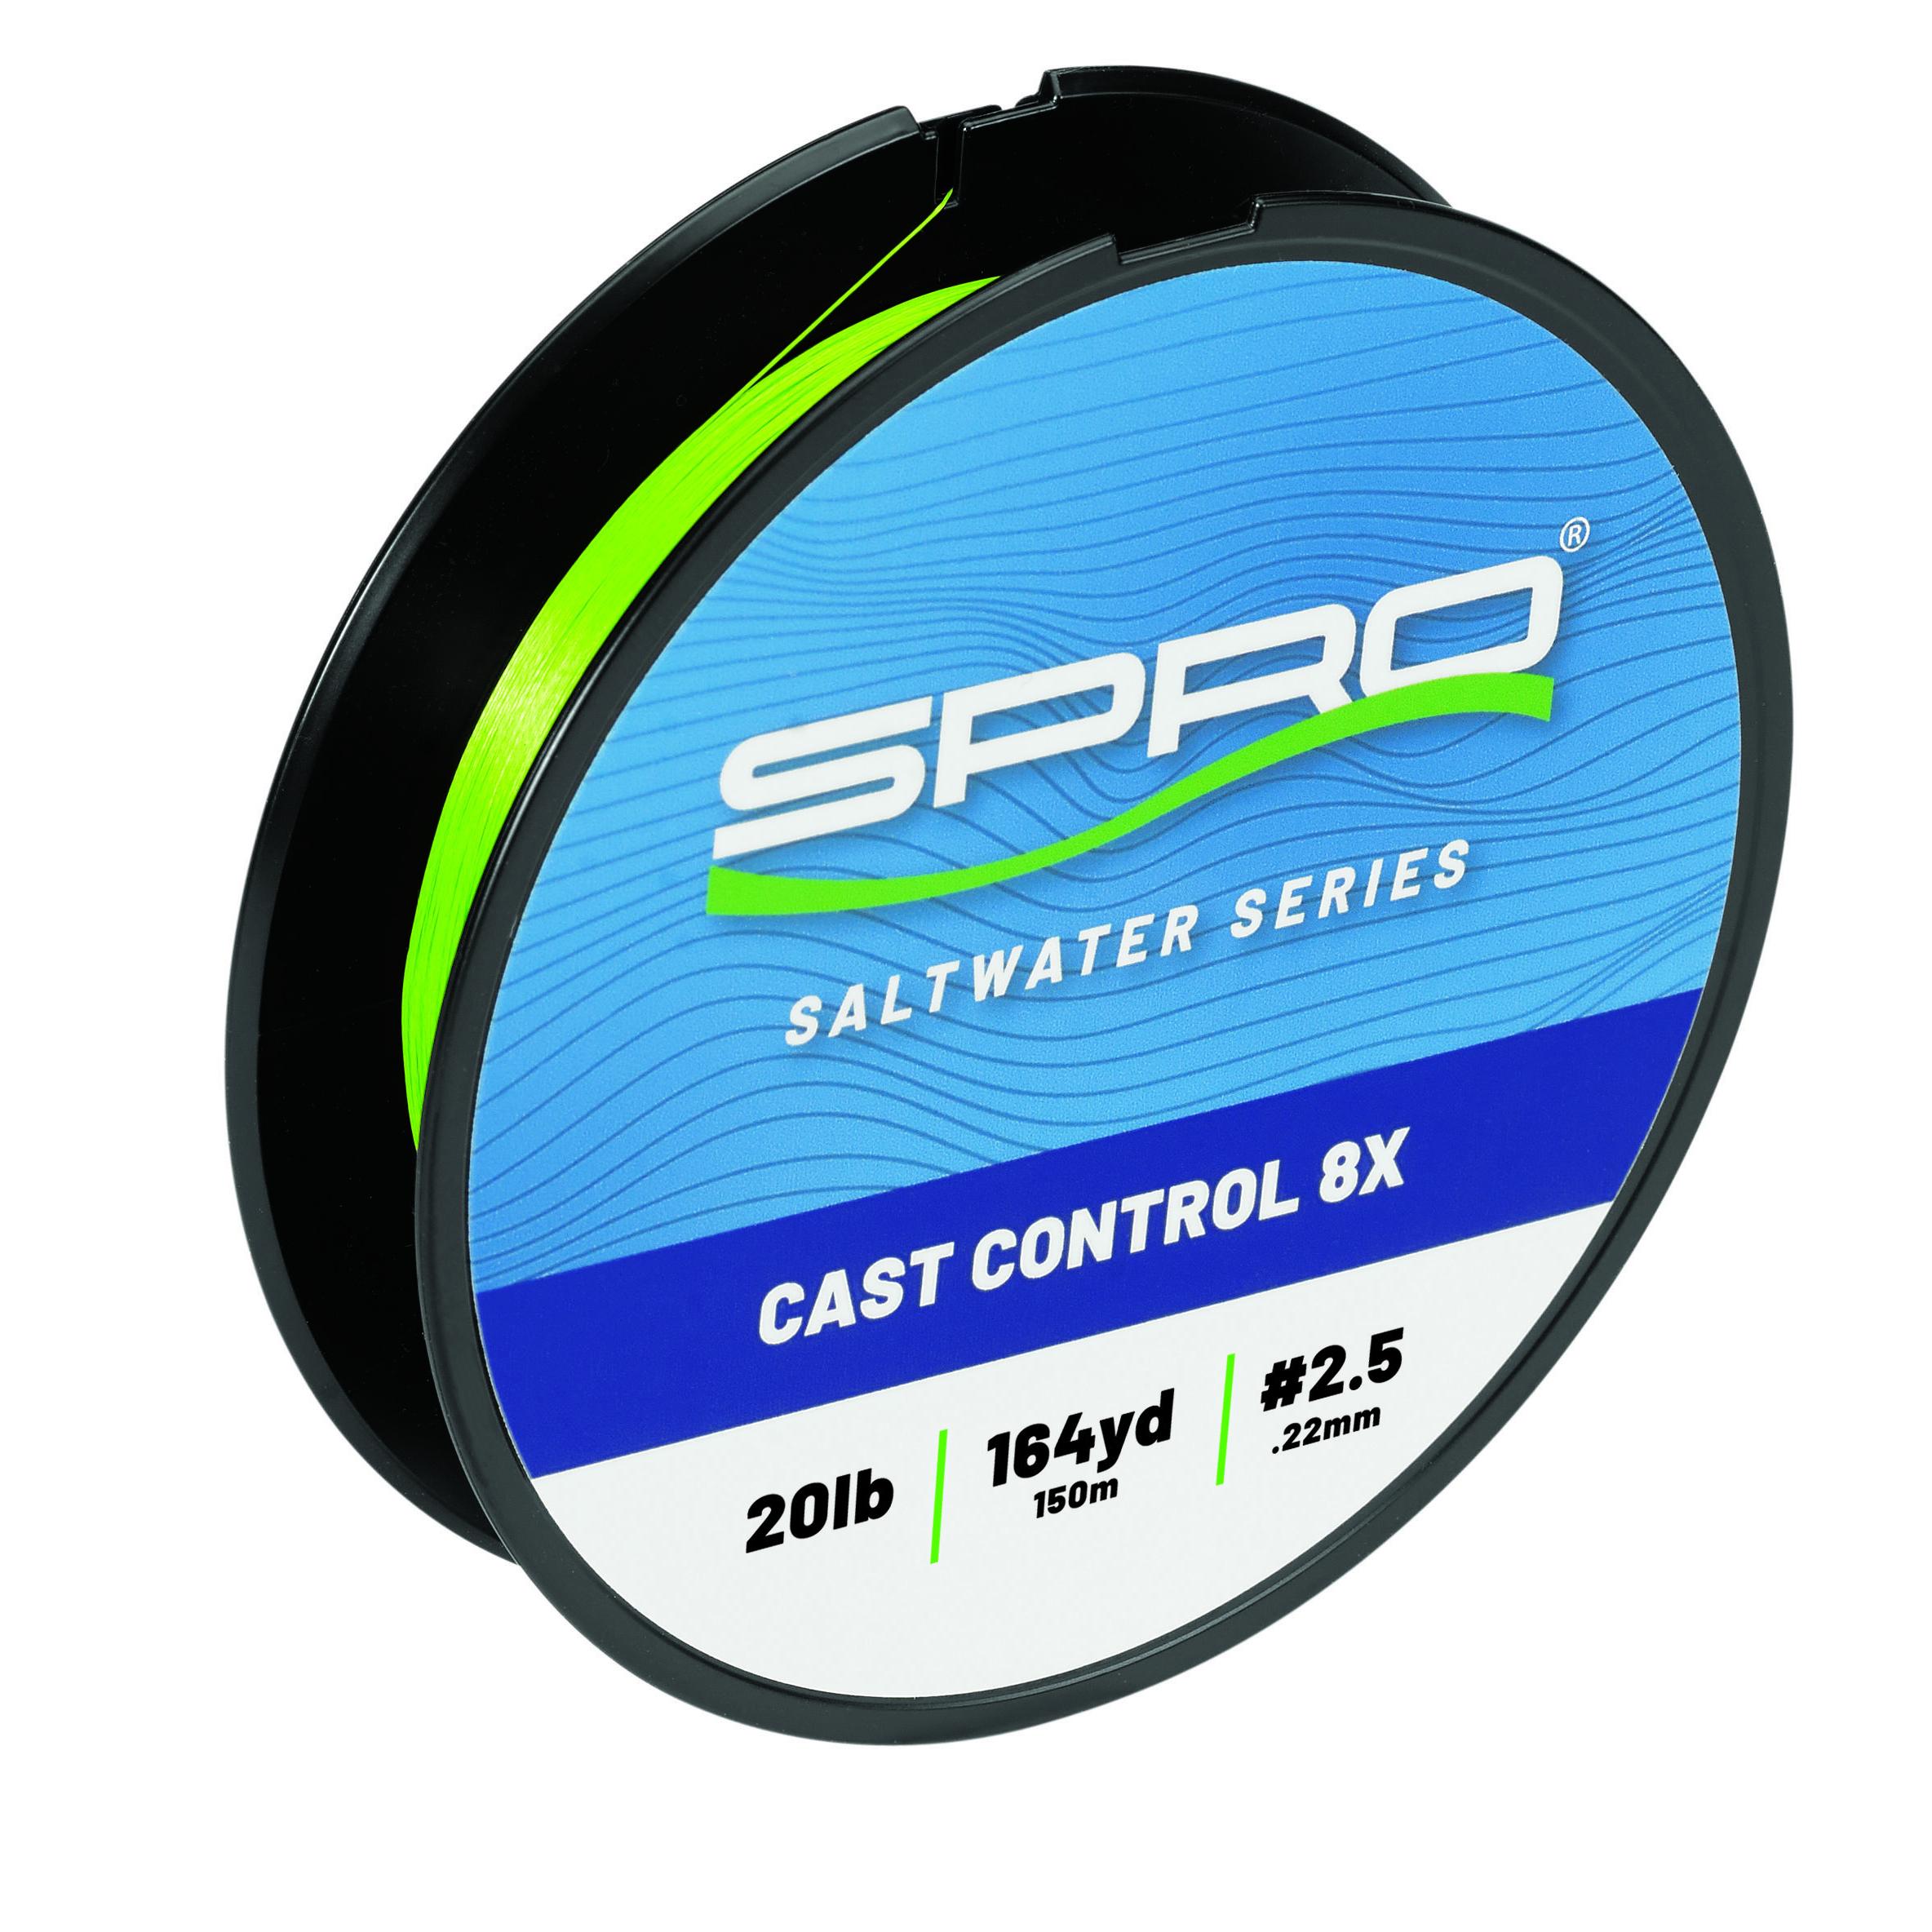 Cast Control 8x Lime Green - SPRO